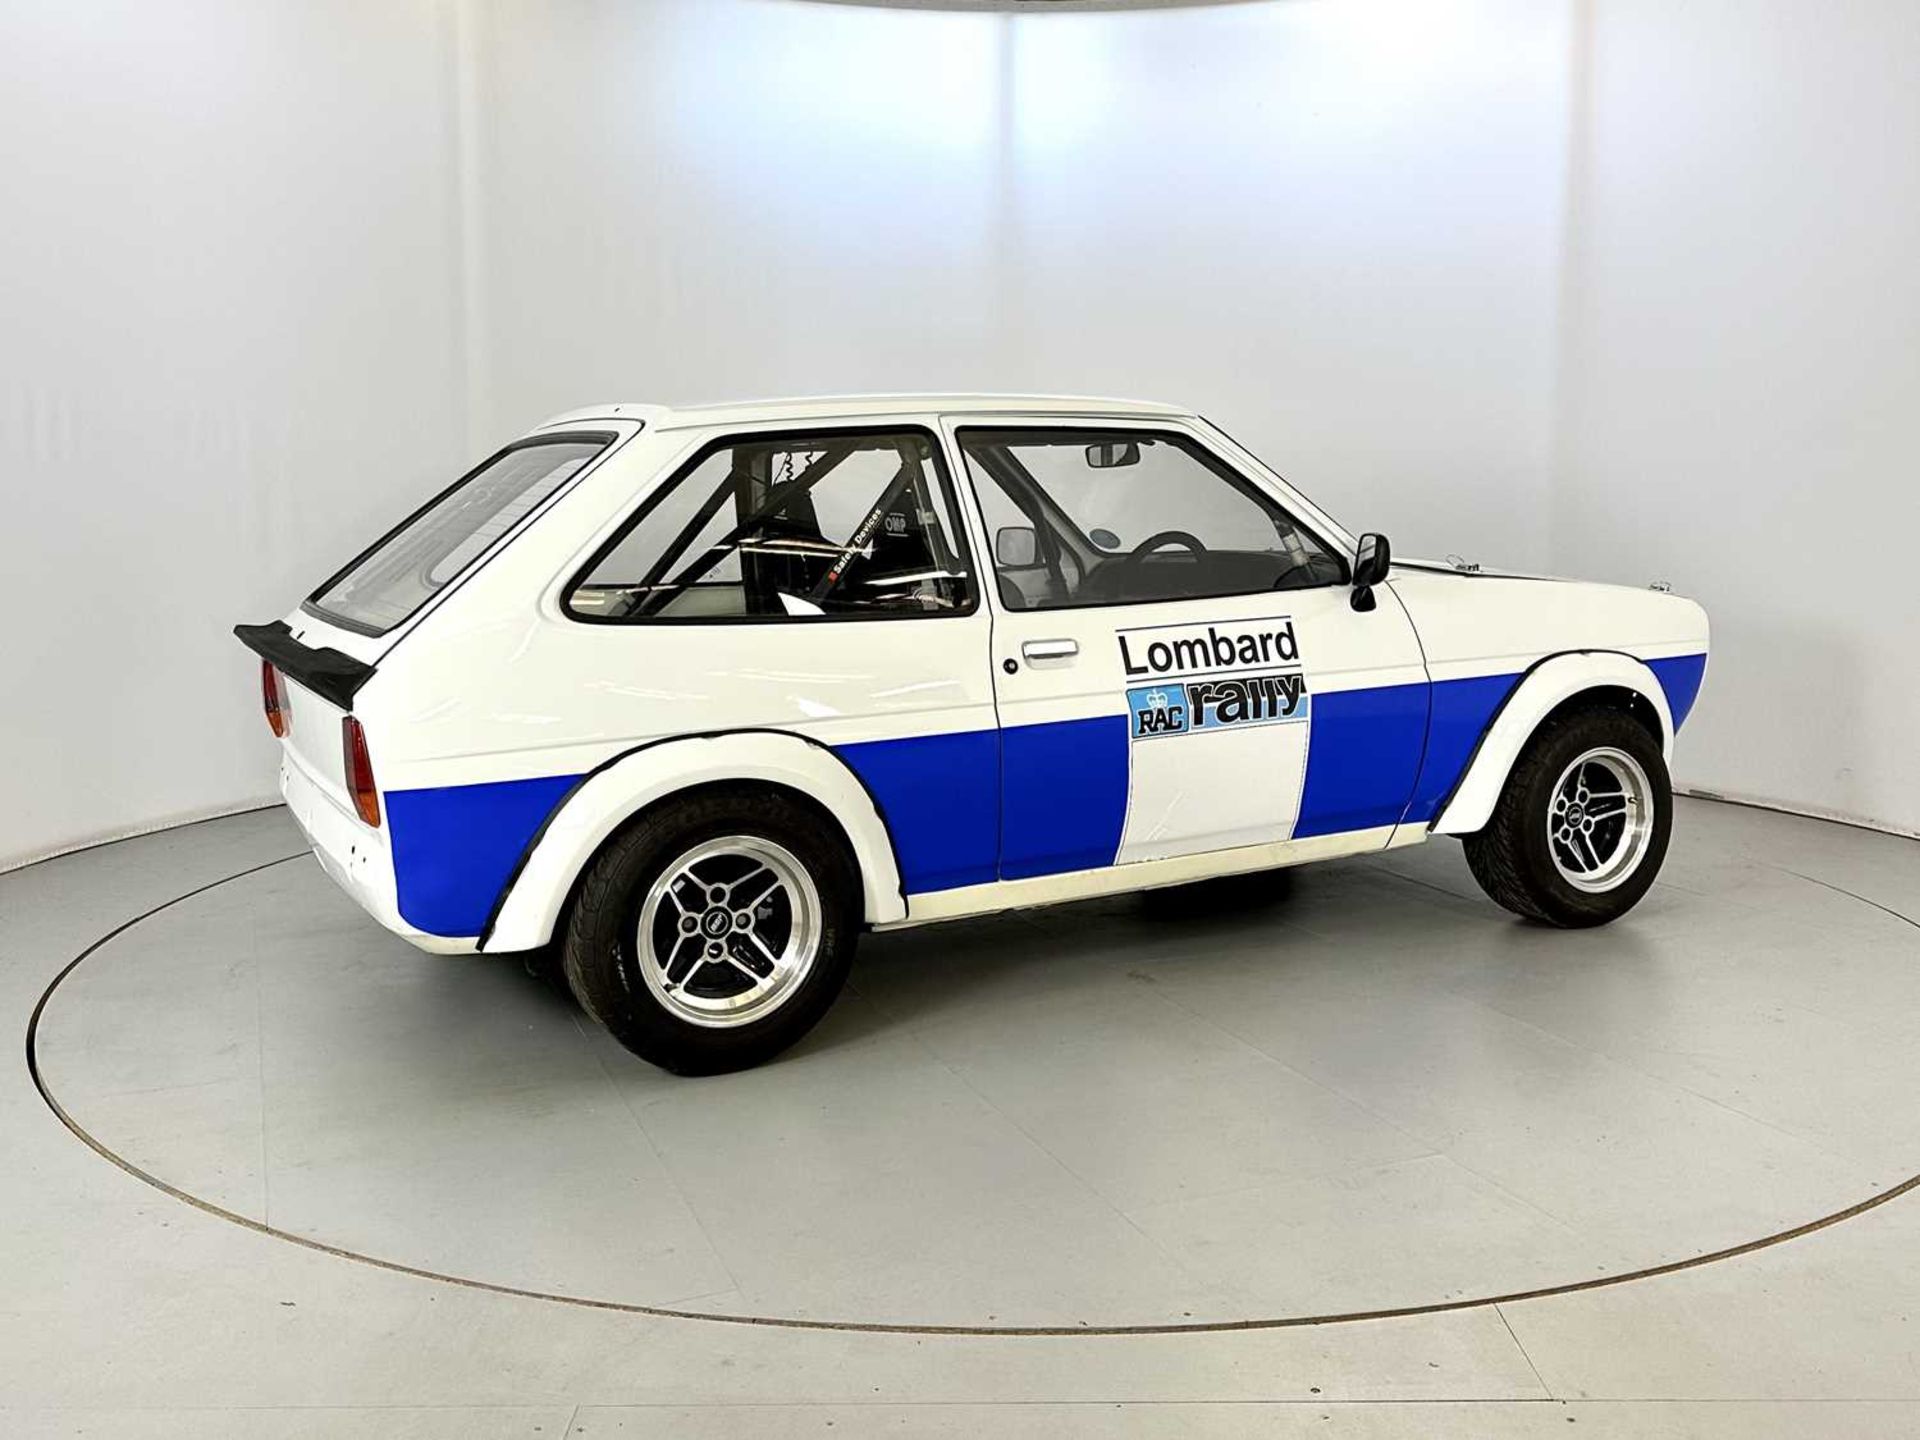 1983 Ford Fiesta XR2 - Image 10 of 28